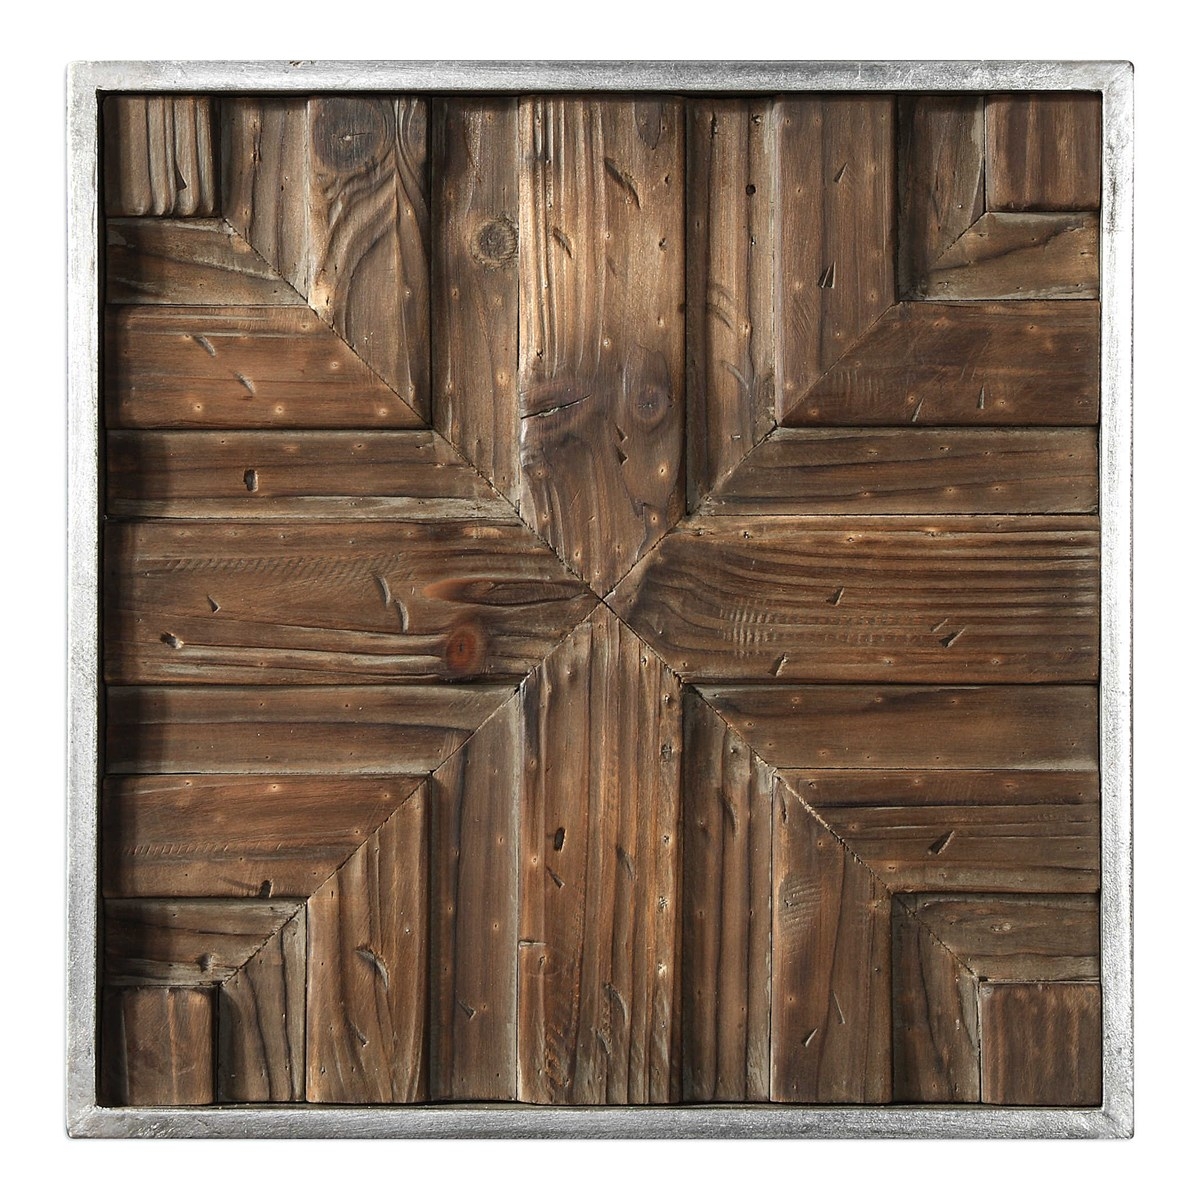 Bryndle Squares Metal Wall Decor S/9 - Image 3